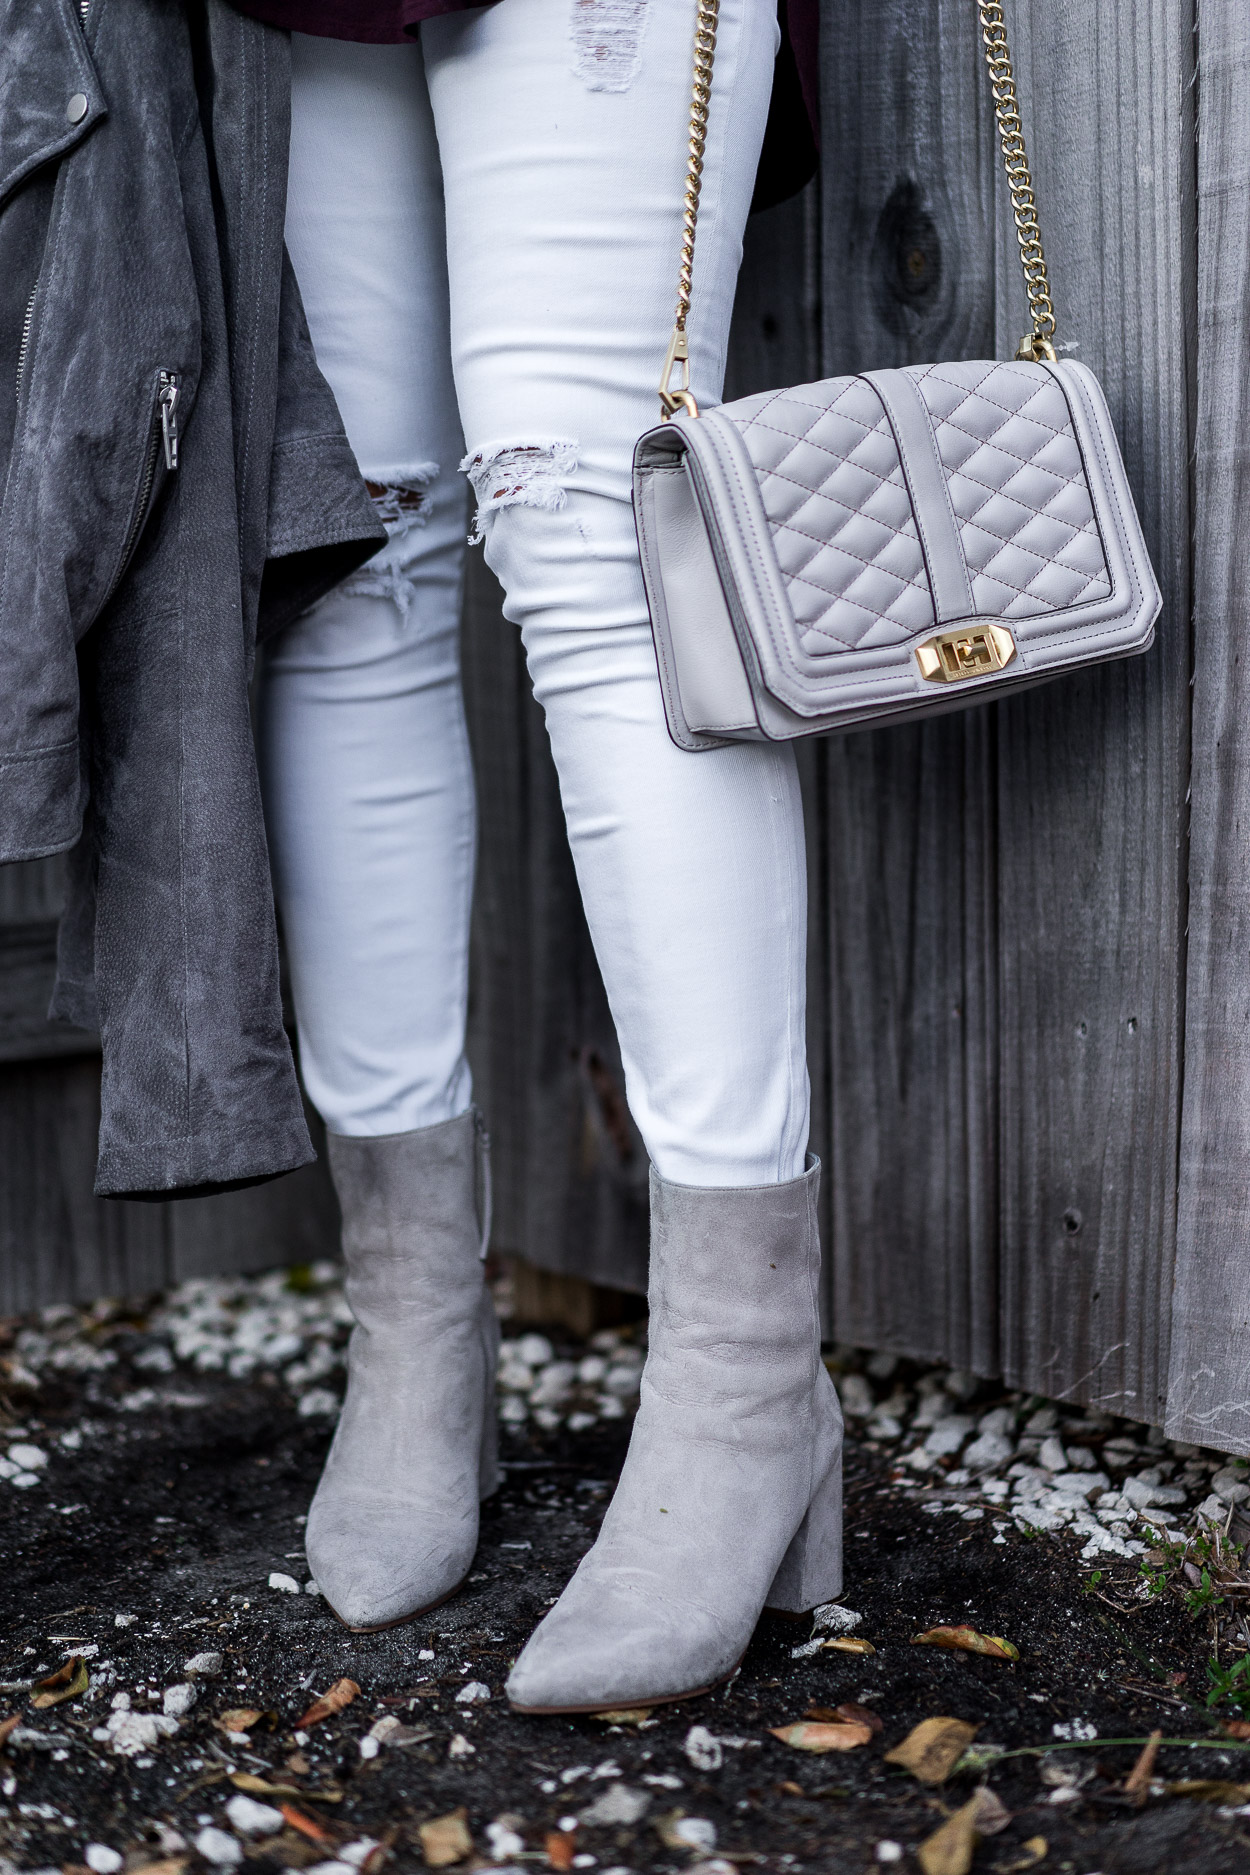 Grey suede jacket and booties for fall